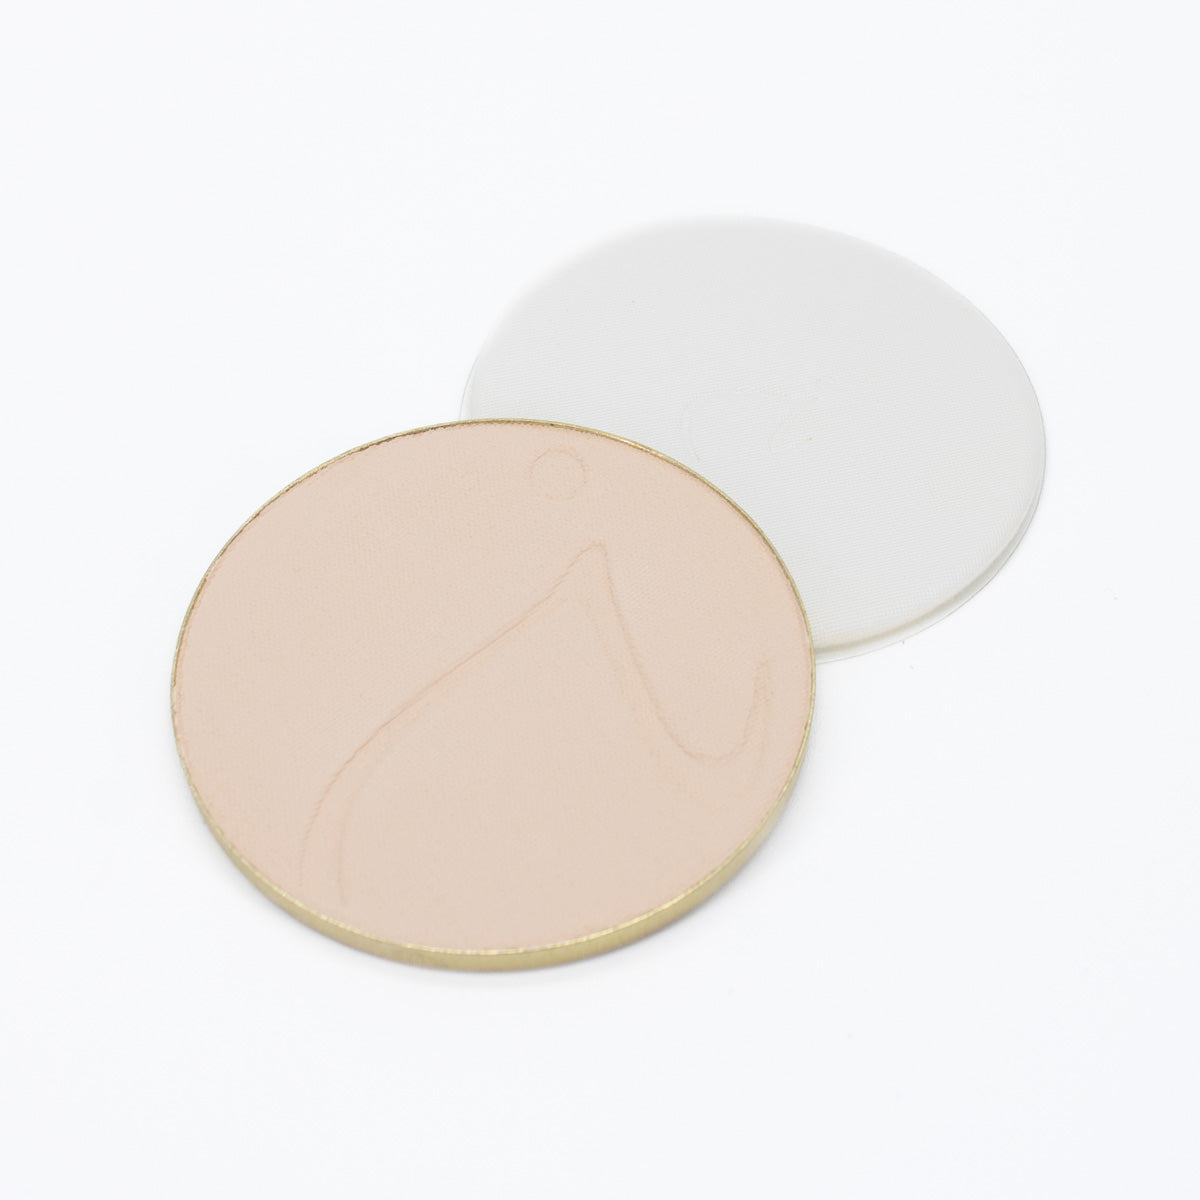 jane iredale PurePressed Base Mineral Foundation REFILL SPF 20 IVORY 0.35oz - Imperfect Box